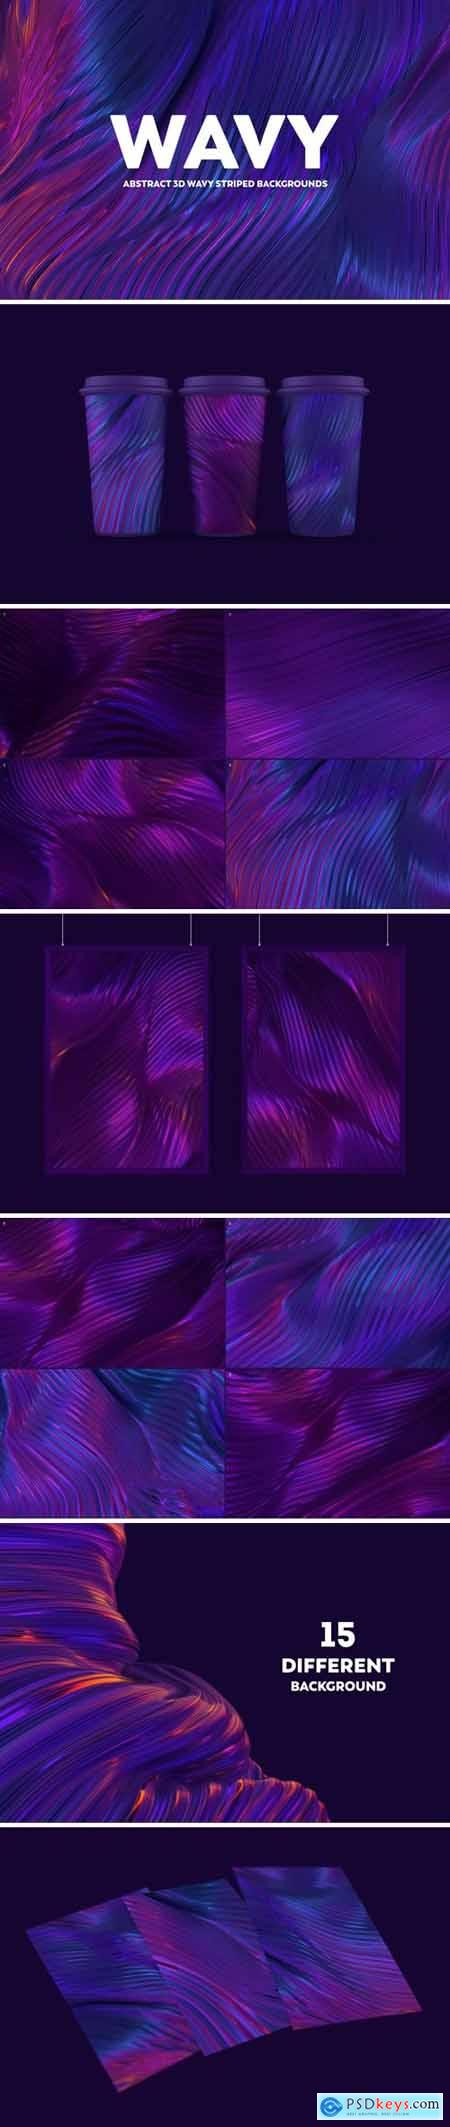 Abstract 3D Wavy Striped Backgrounds LV8GV8T